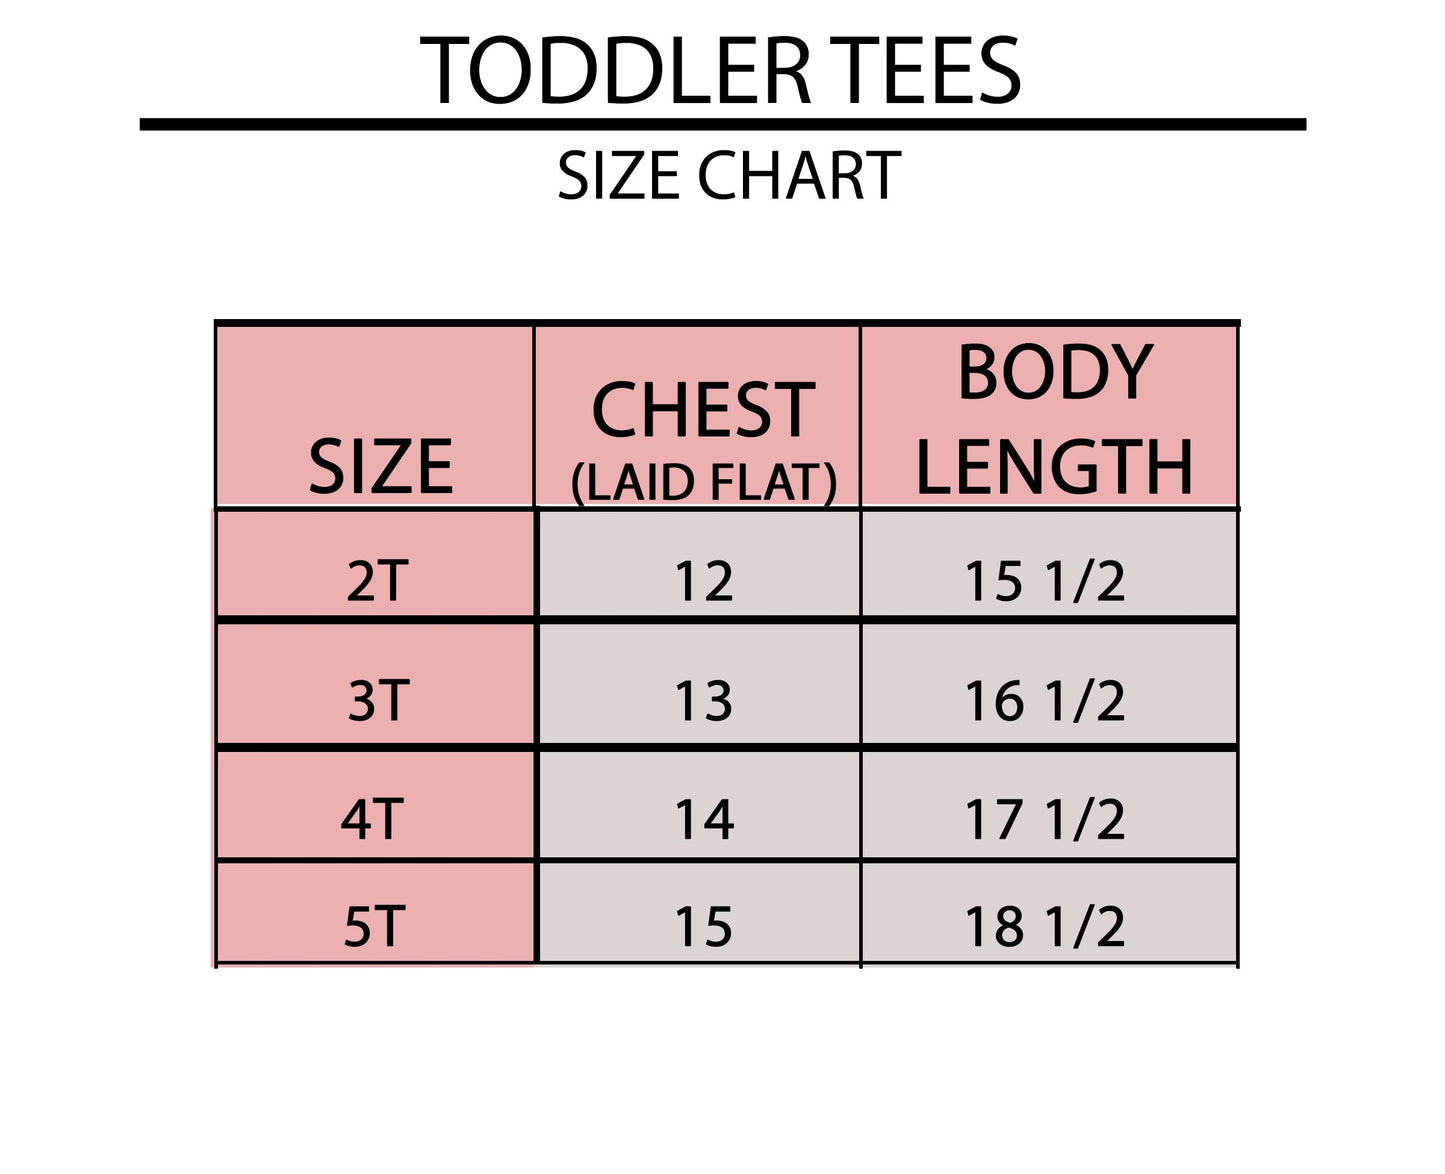 Retro Treat People With Kindness | Toddler Short Sleeve Crew Neck